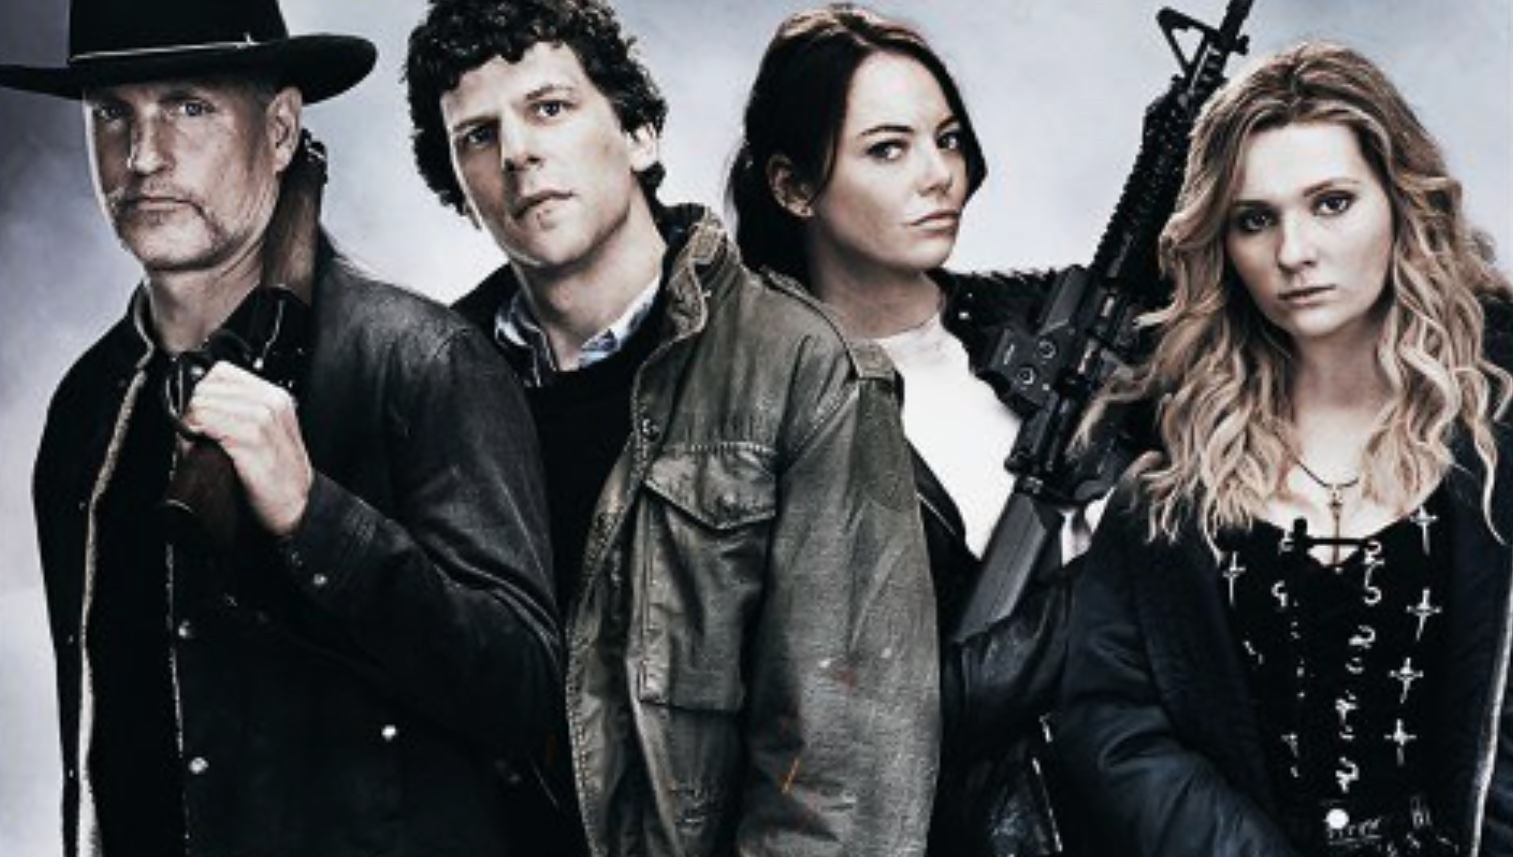 This new recap video for “Zombieland: Double Tap” features new rules (and cast members too!)